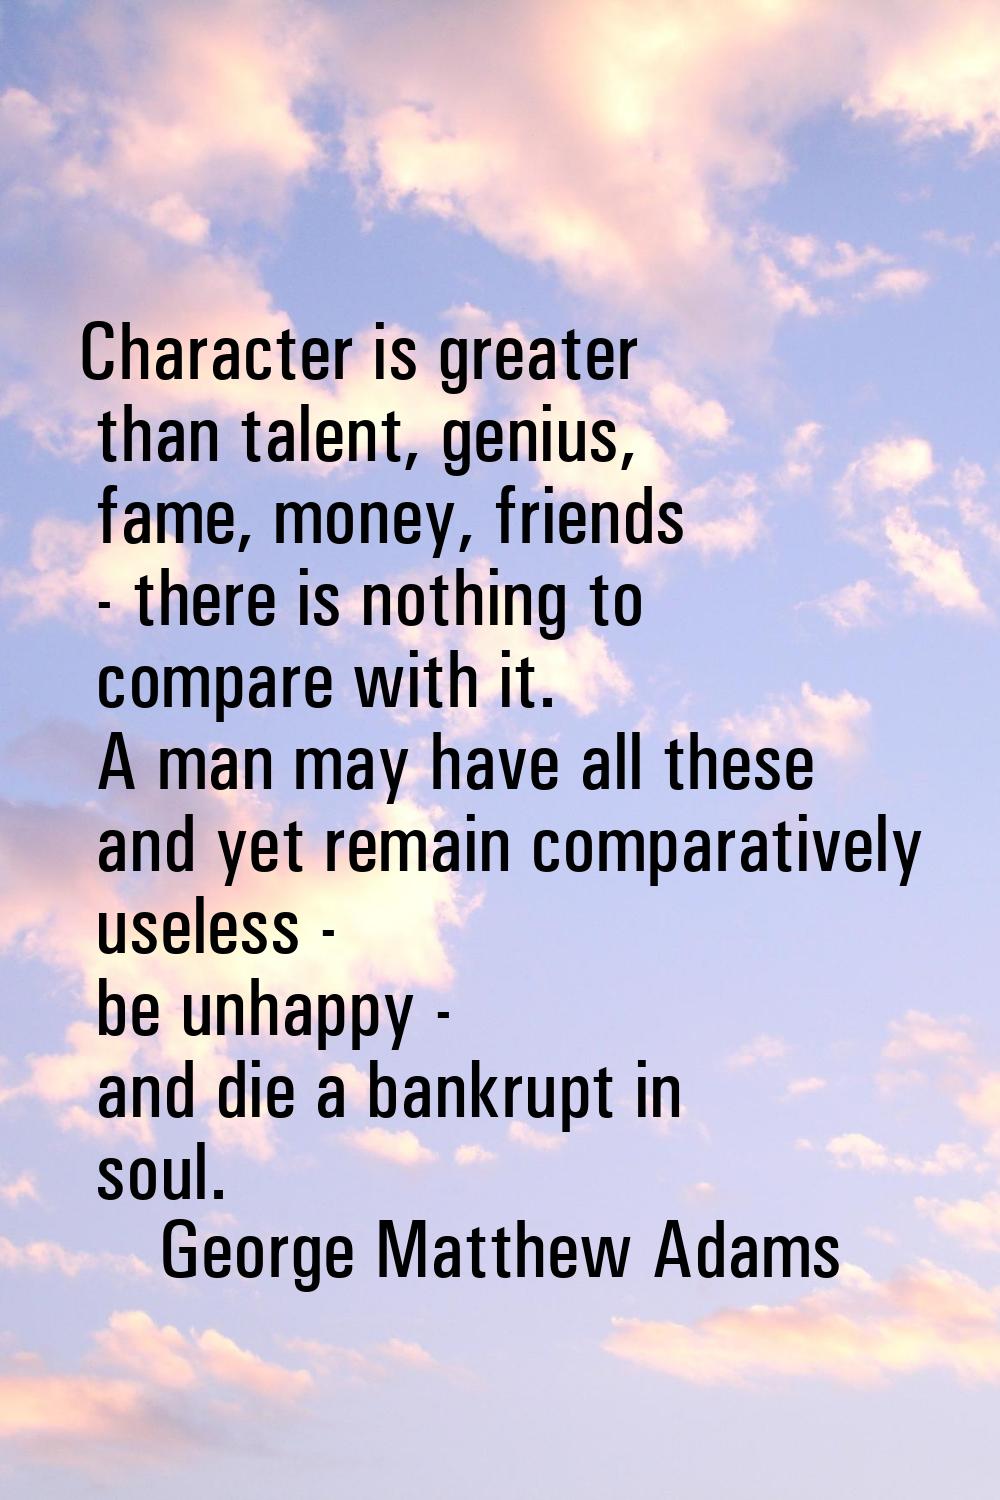 Character is greater than talent, genius, fame, money, friends - there is nothing to compare with i